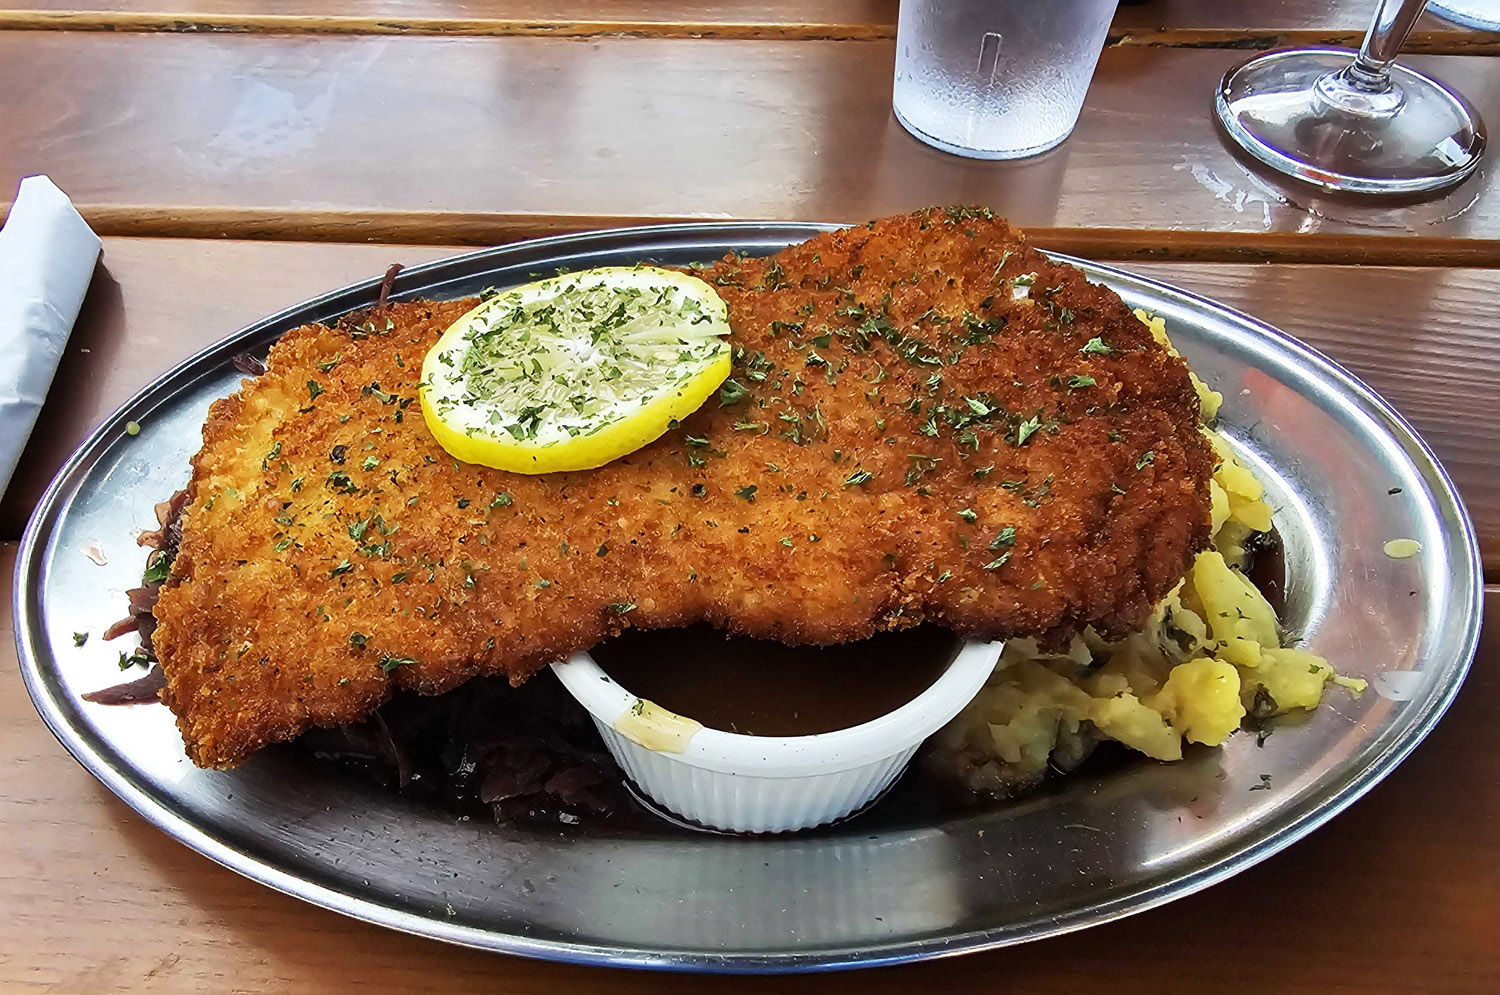 Pork schnitzel with potato salad and red cabbage at Urban German Wursthaus in St Johns